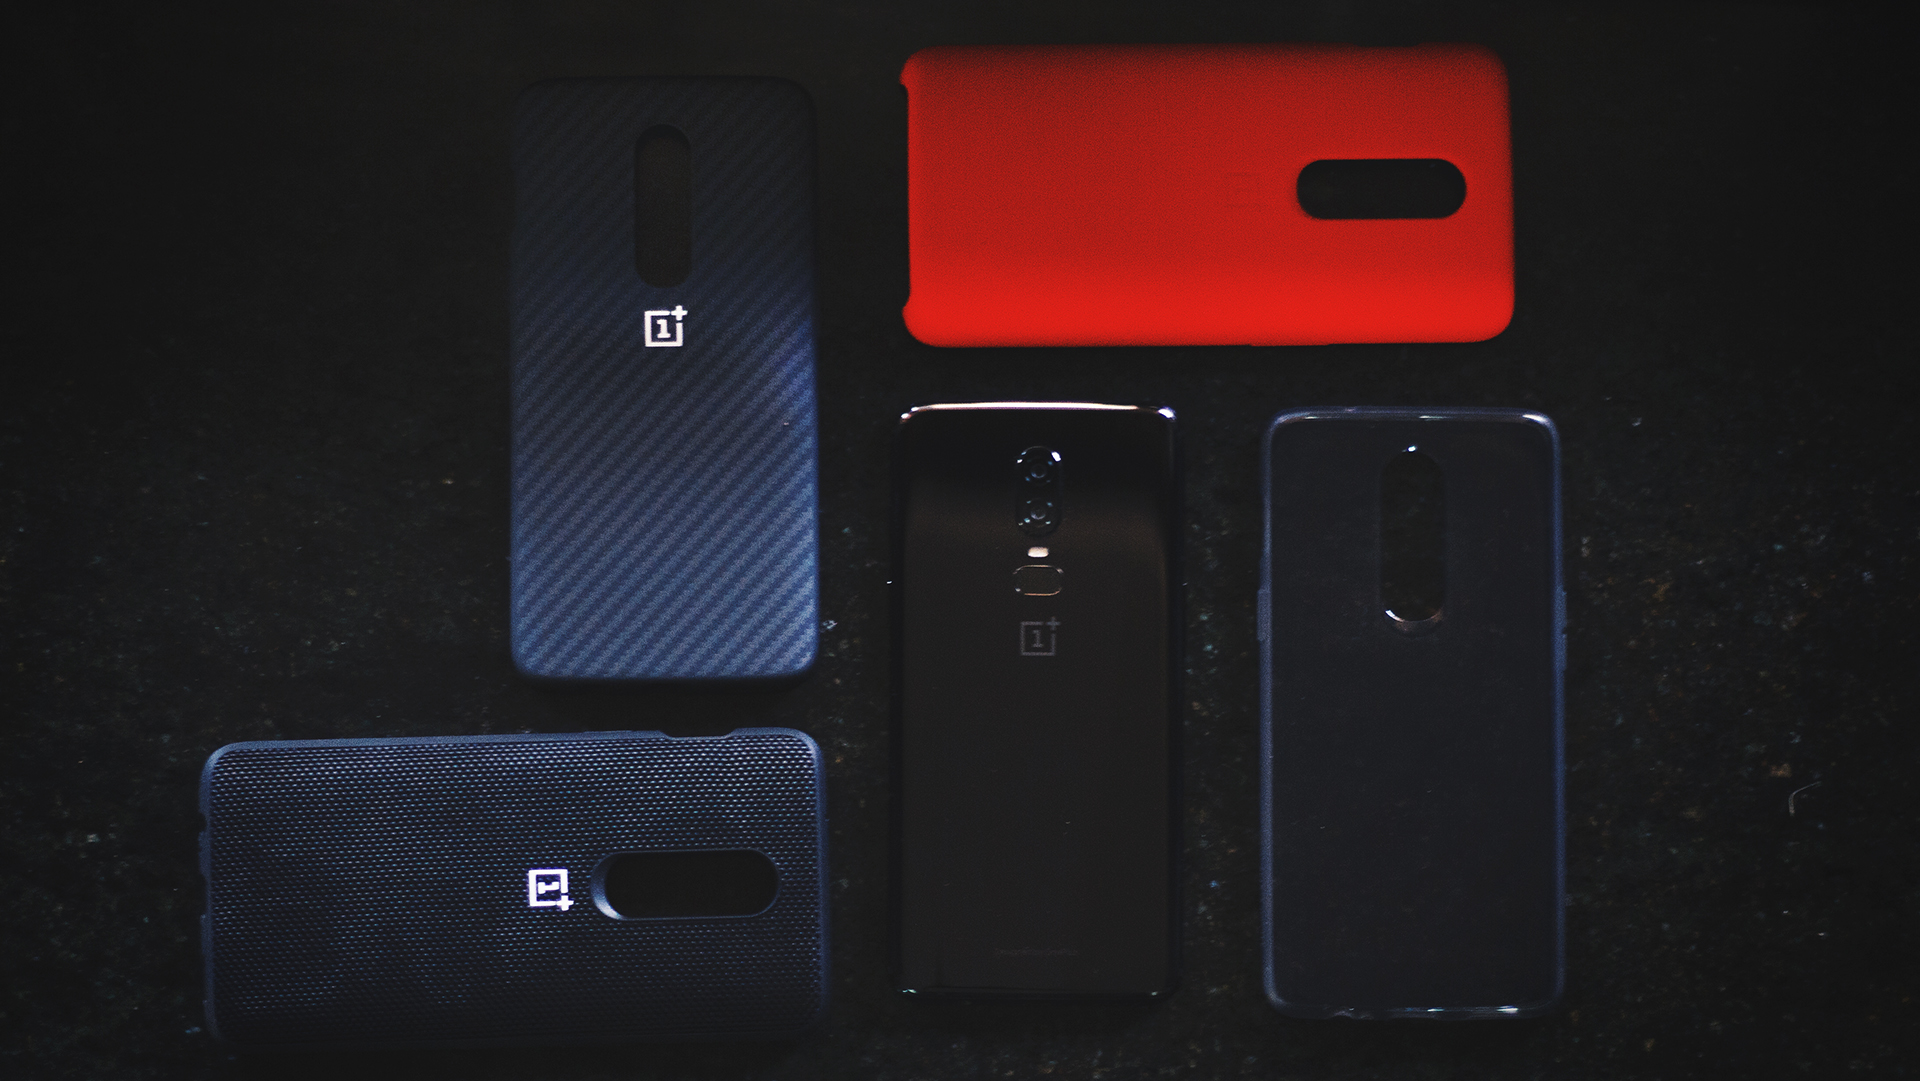 Truetech Oneplus6 Review Phone And Cases 1 – Oneplus 6 Review – The Nearly Quintessential Phone That Oneplus Made | Truetech